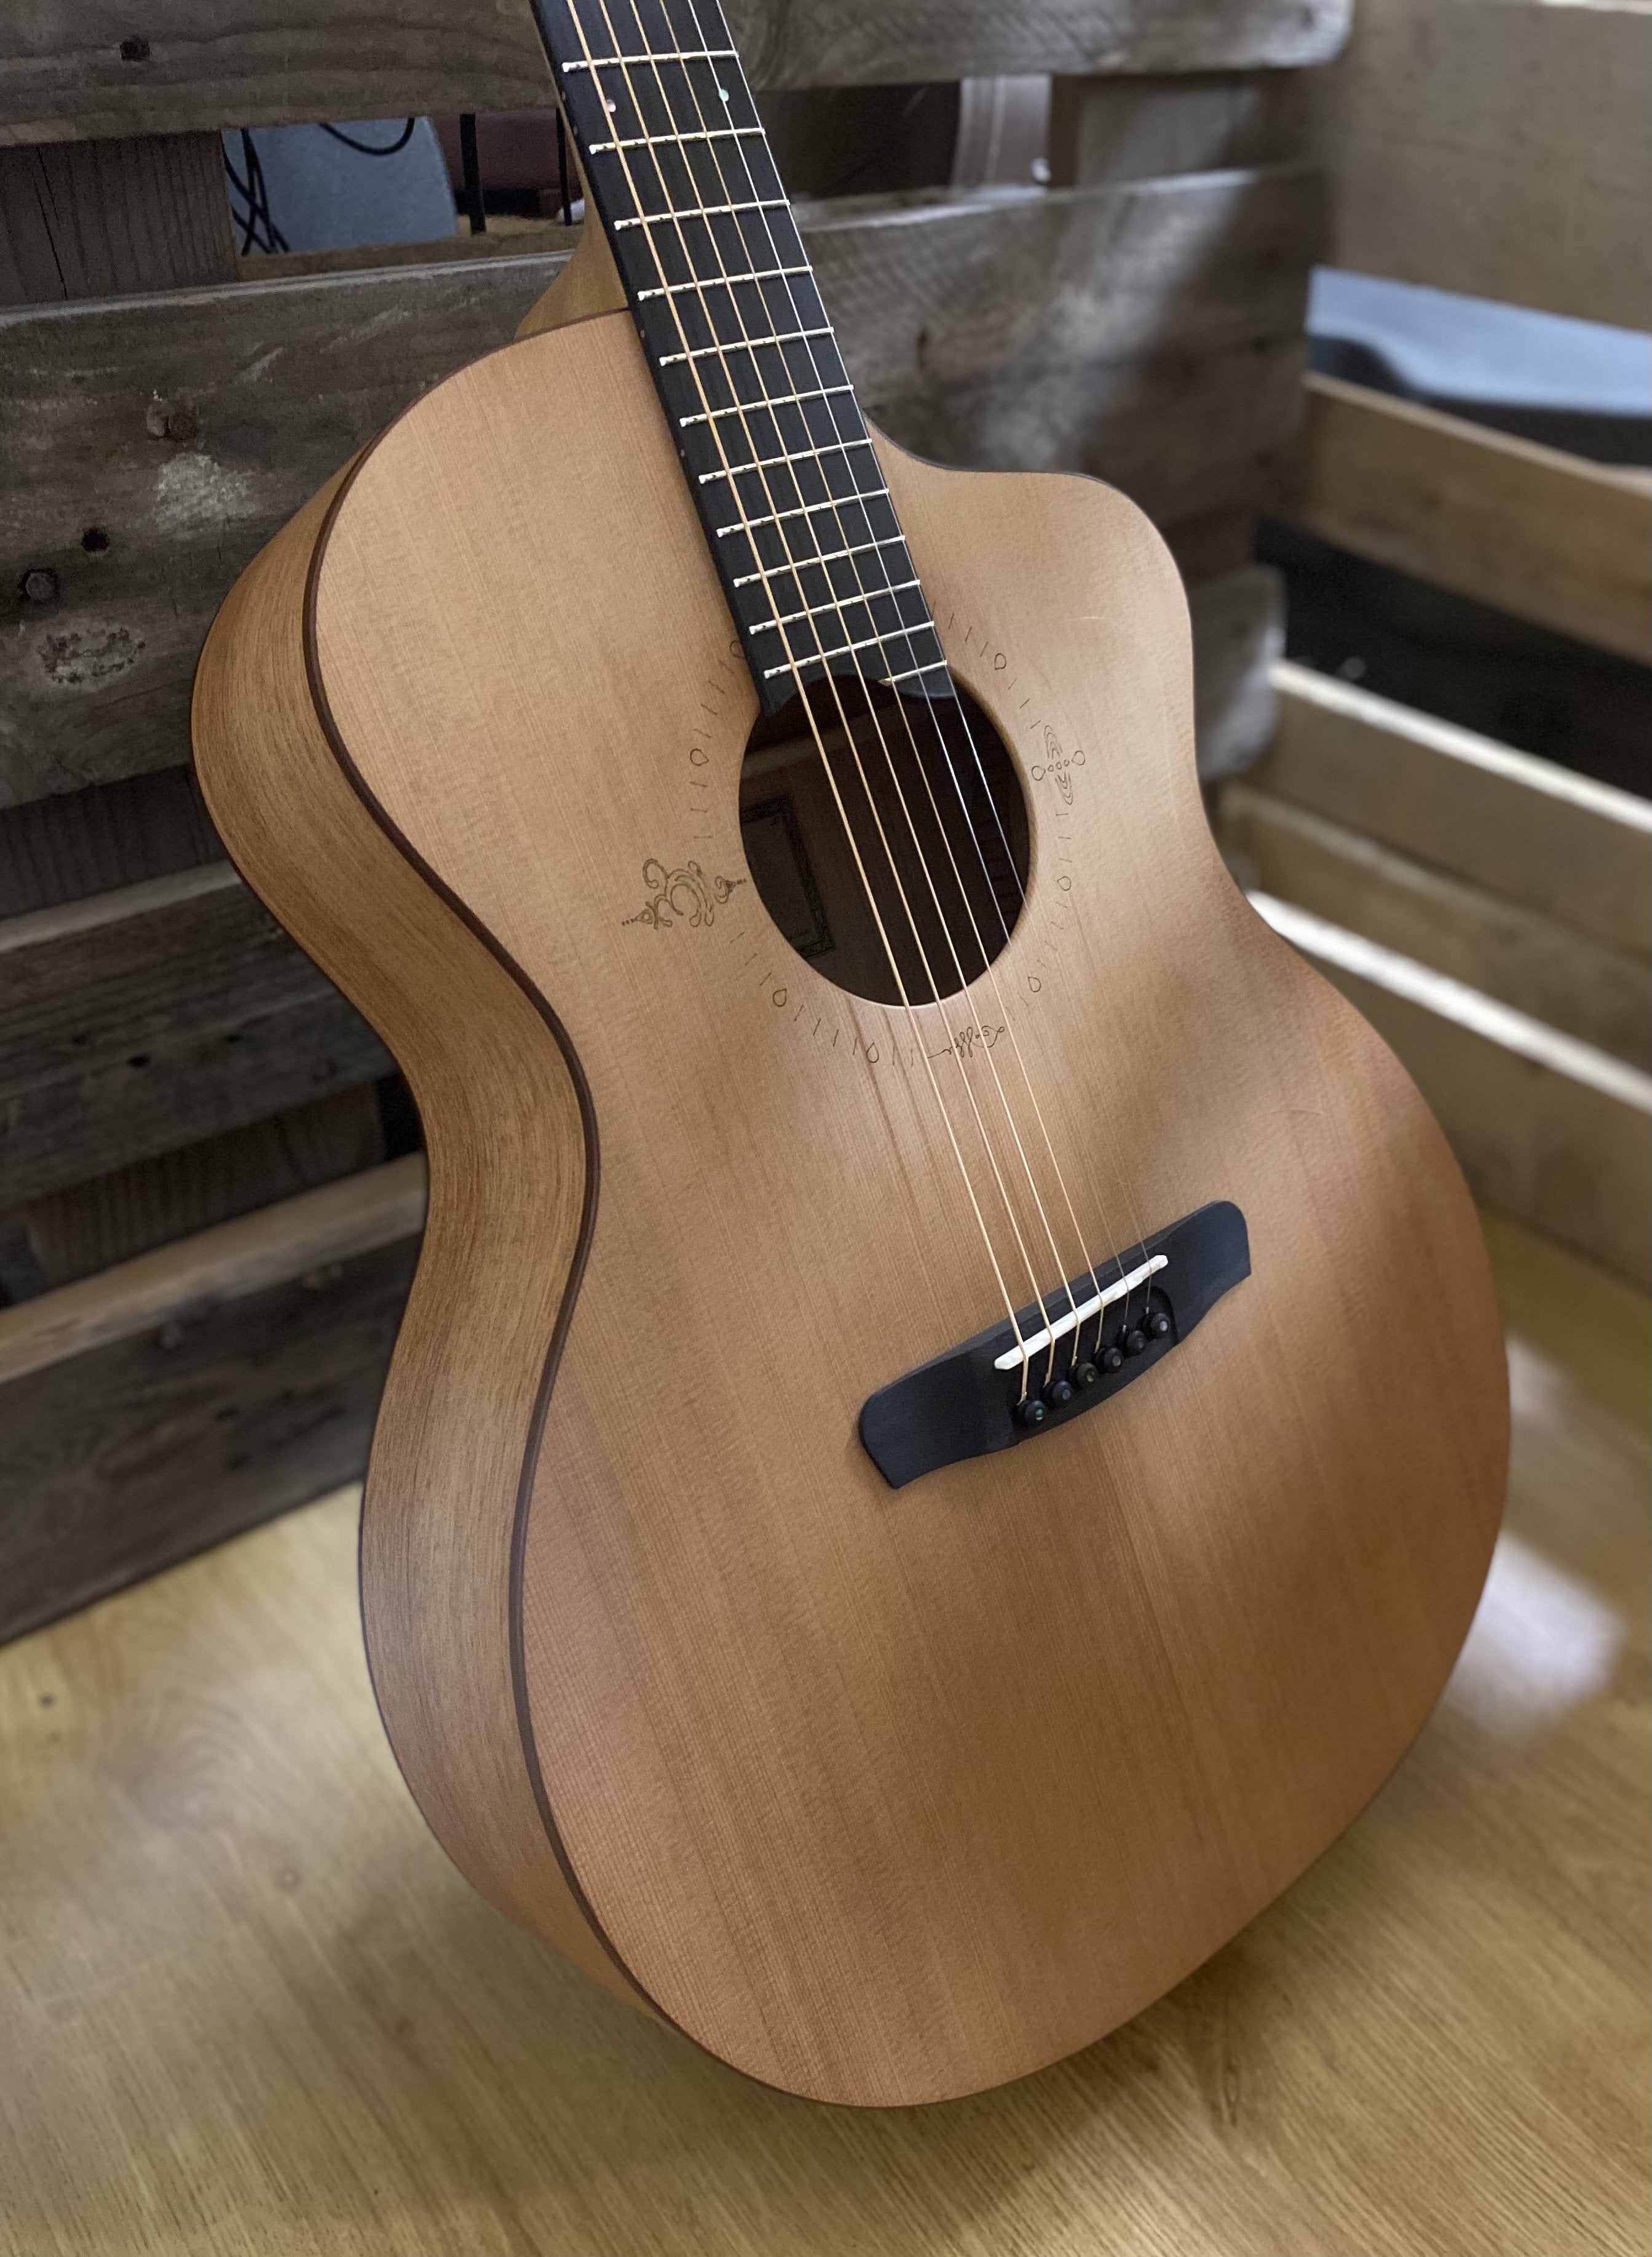 Dowina Pure GAC - The Worlds Finest Value Hand Made Acoustic Guitar?, Acoustic Guitar for sale at Richards Guitars.